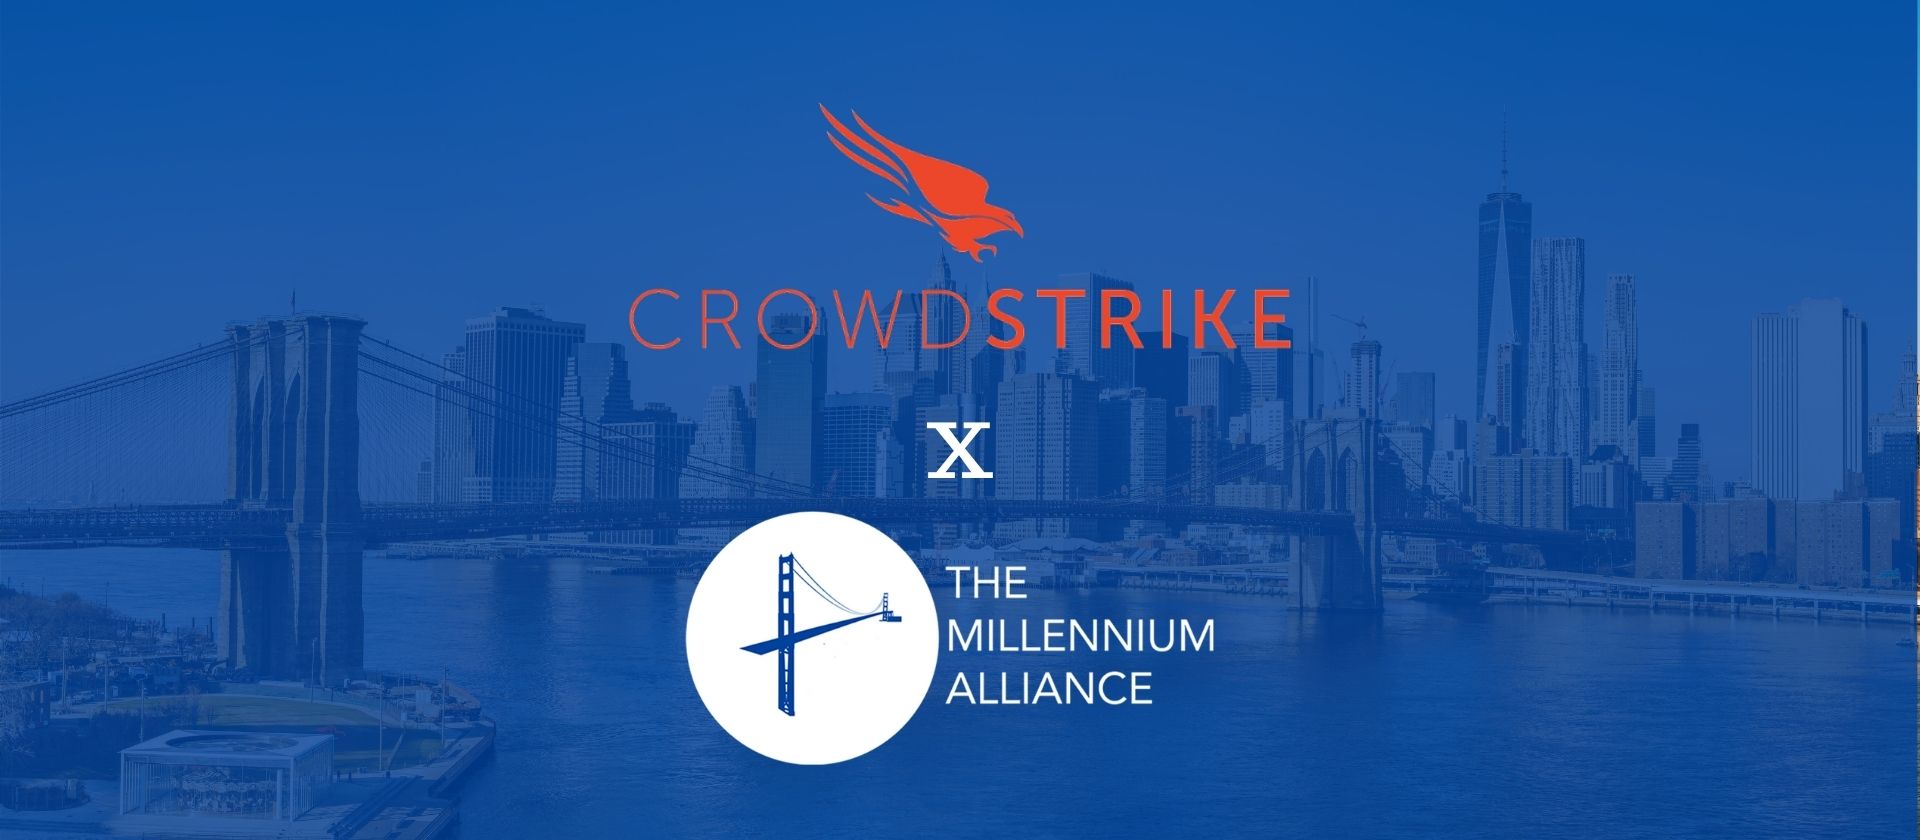 The Millennium Alliance Confirms CrowdStrike As Their Diamond Sponsor For Their Upcoming Flagship Cybersecurity Assembly